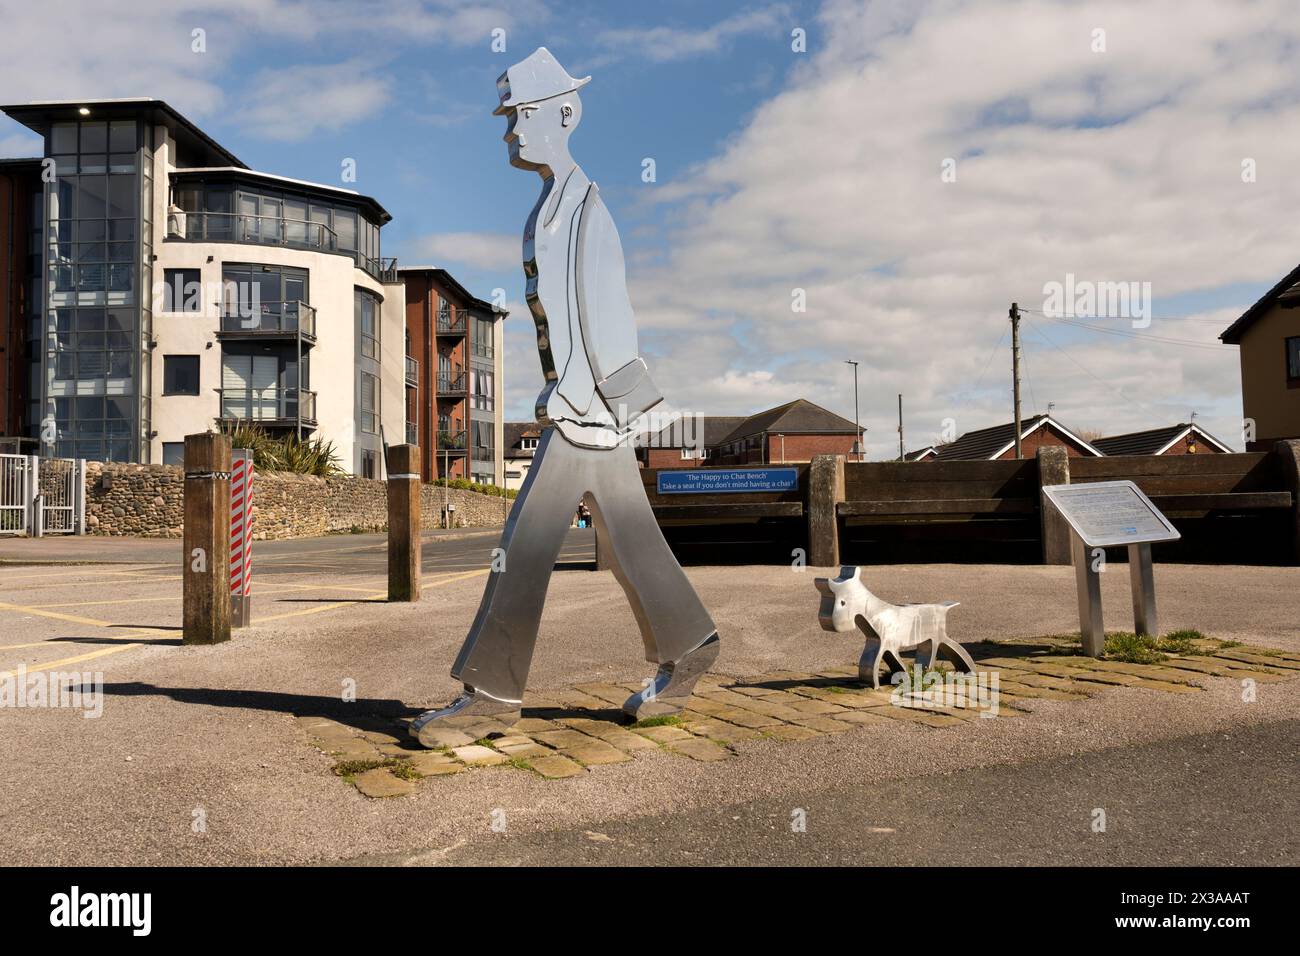 Stainless steel figures of a man and a dog, Knott End-on-Sea, Lancashire. An artwork created to commemorate the visits and work of painter L.S. Lowry. Stock Photo